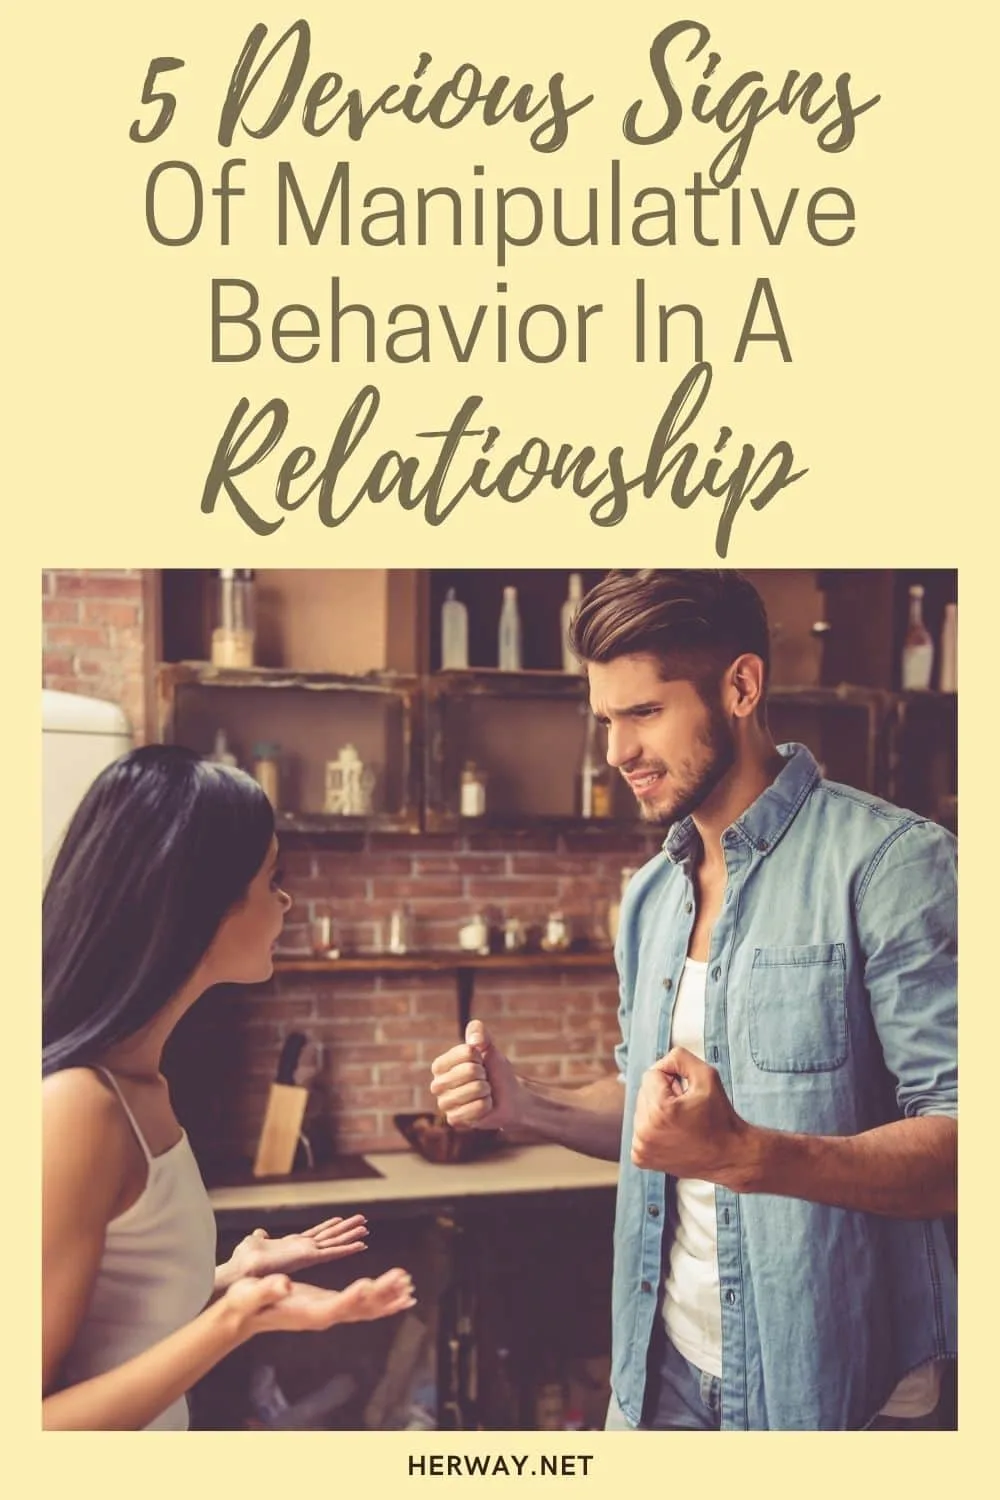 5 Devious Signs Of Manipulative Behavior In A Relationship